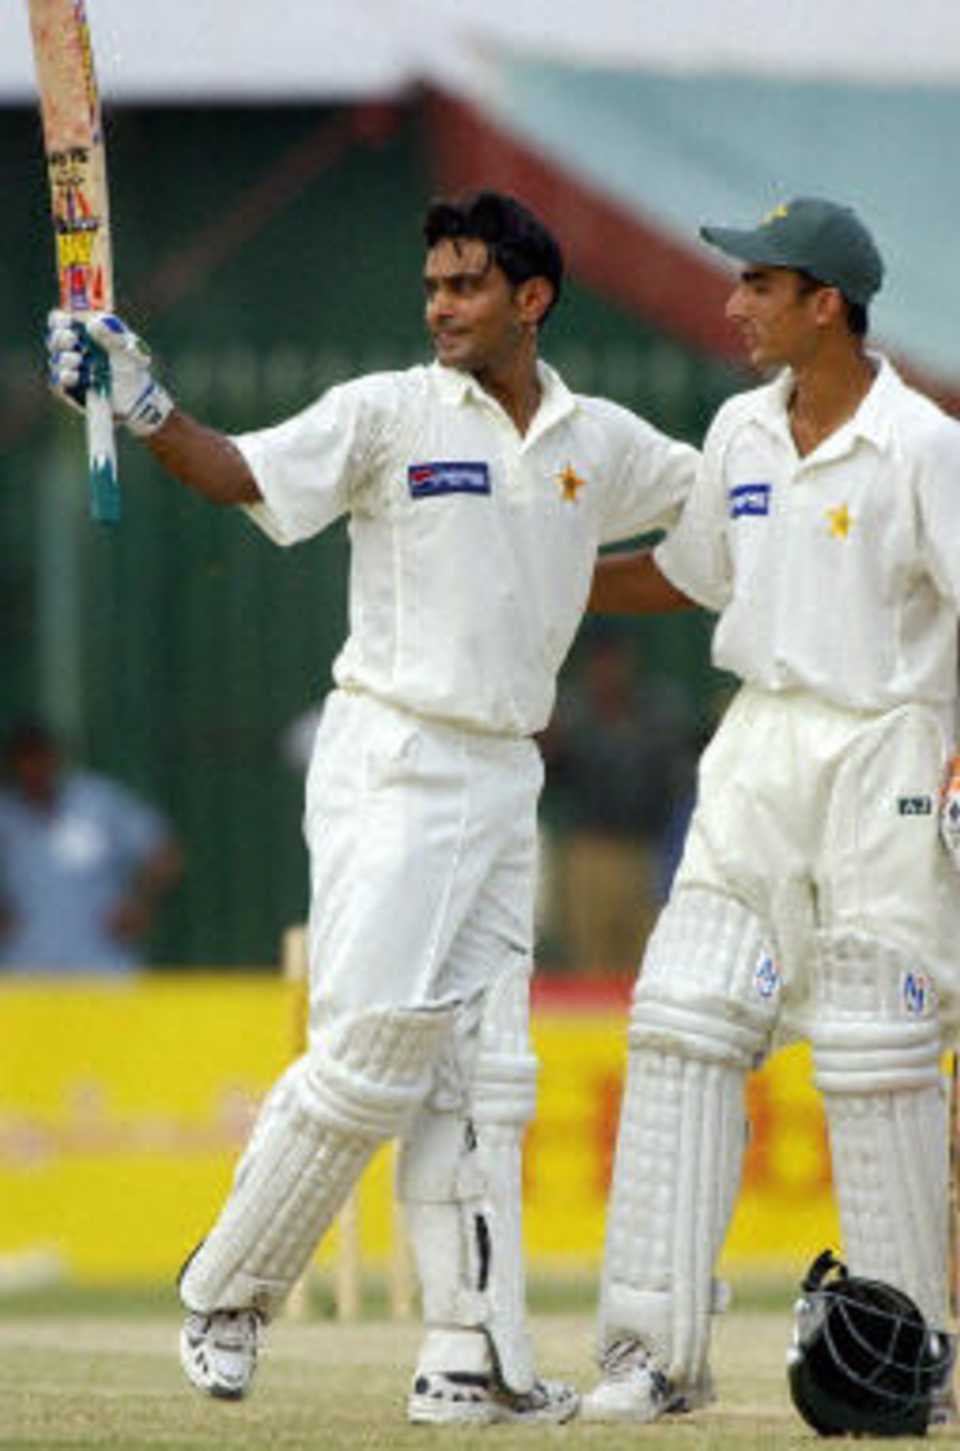 Mohammad Hafeez (L) acknowledges the crowd after his first Test century